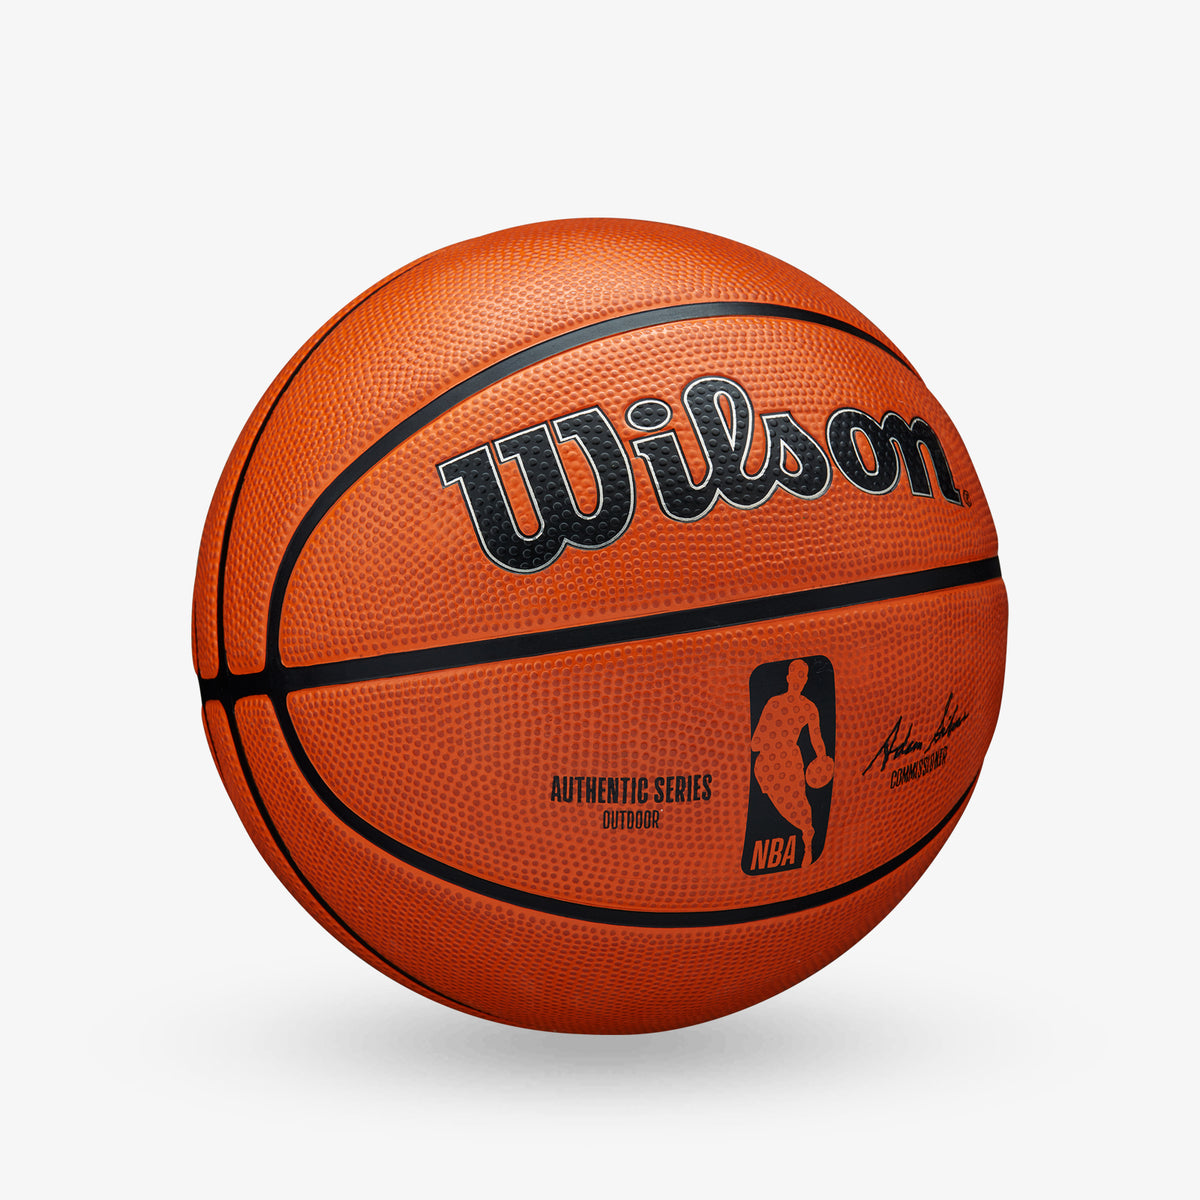 NBA Authentic Series Outdoor Basketball - Size 6